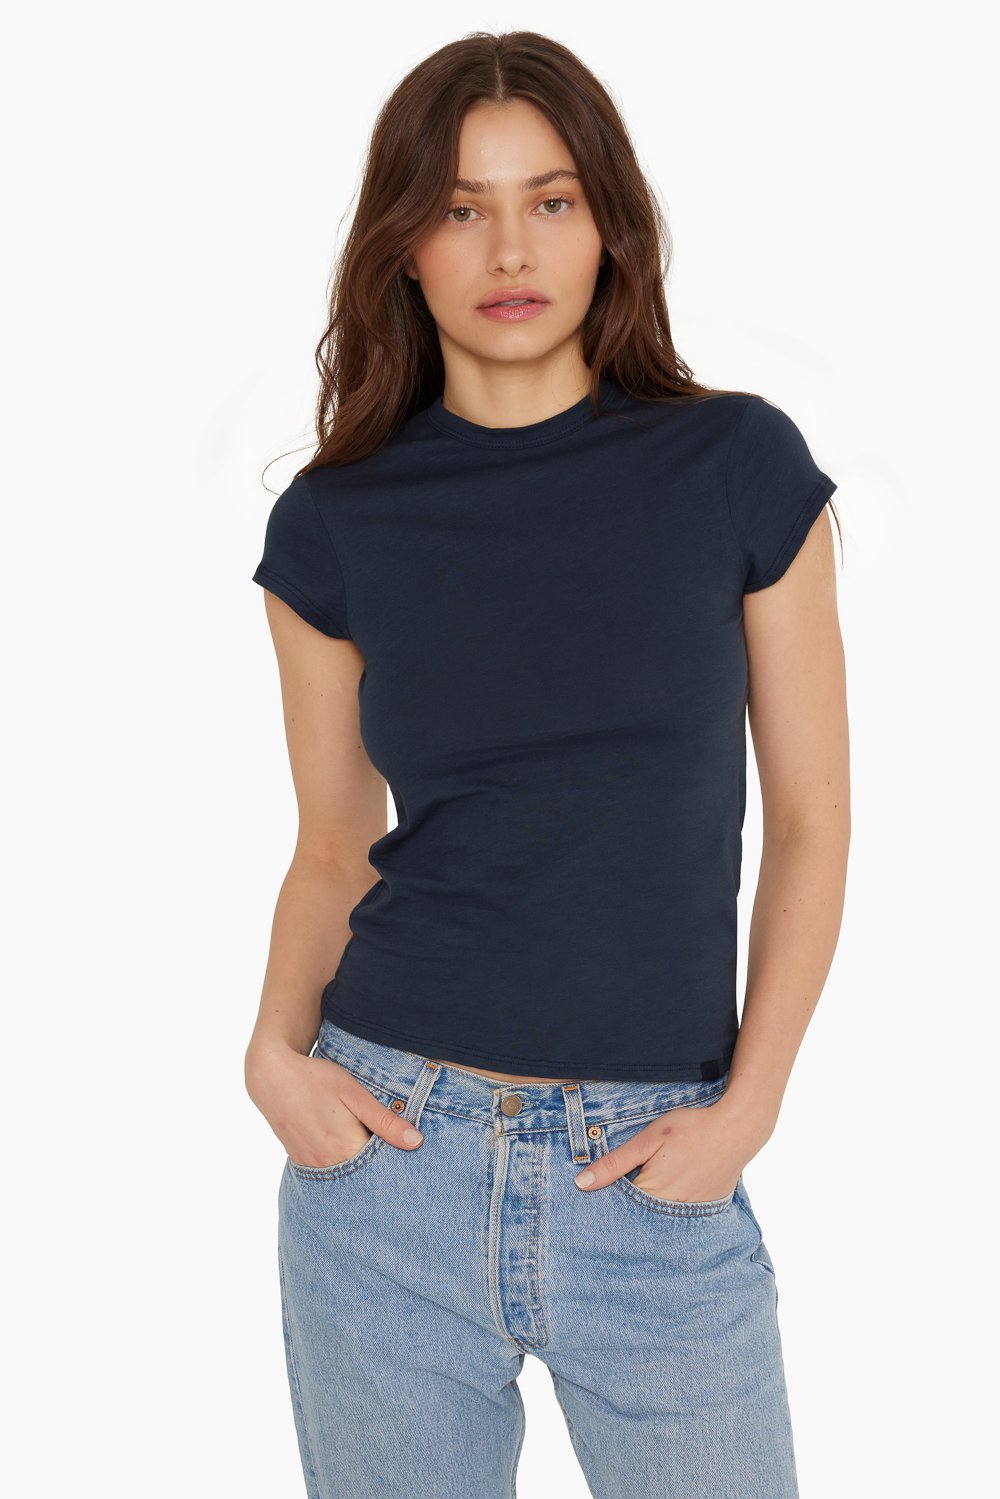 CLASSIC COTTON GIRLFRIEND TEE - OXFORD Featured Image